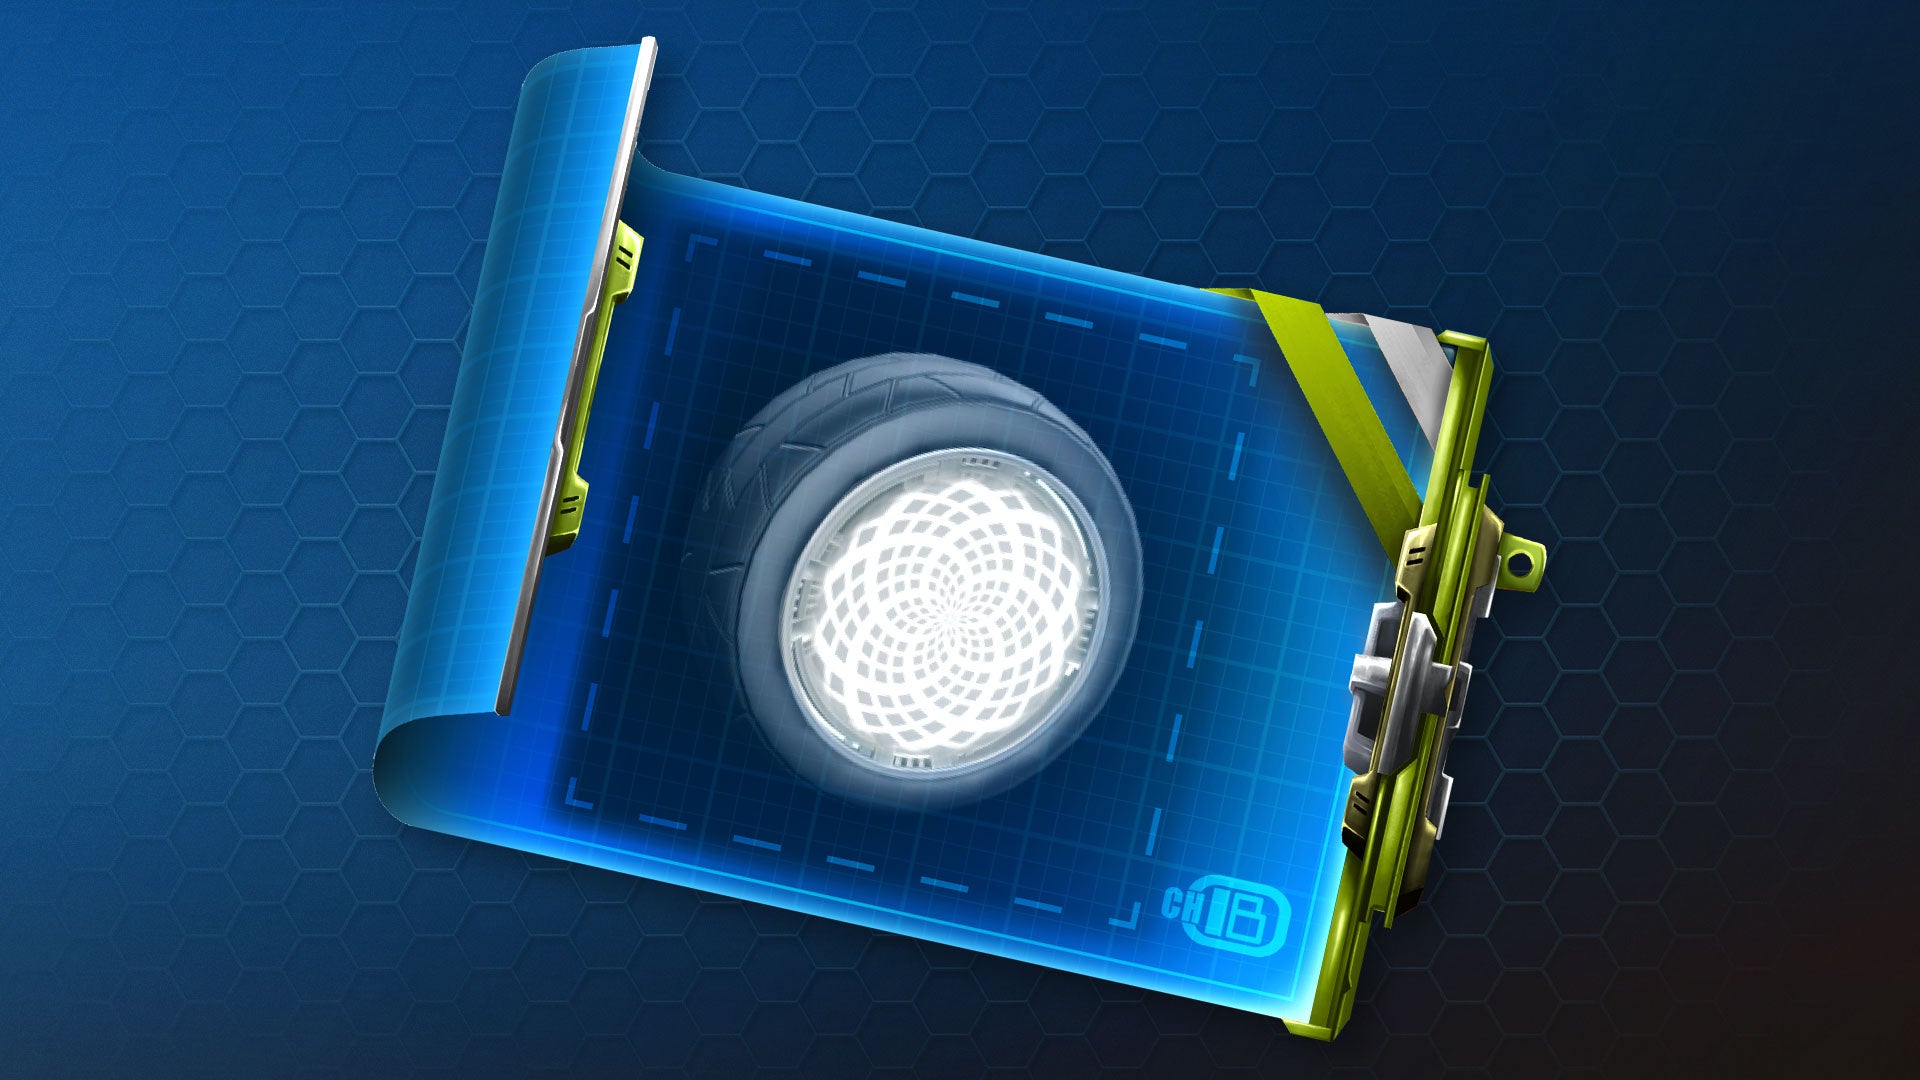 rocket league patch notes italiana update 1.70